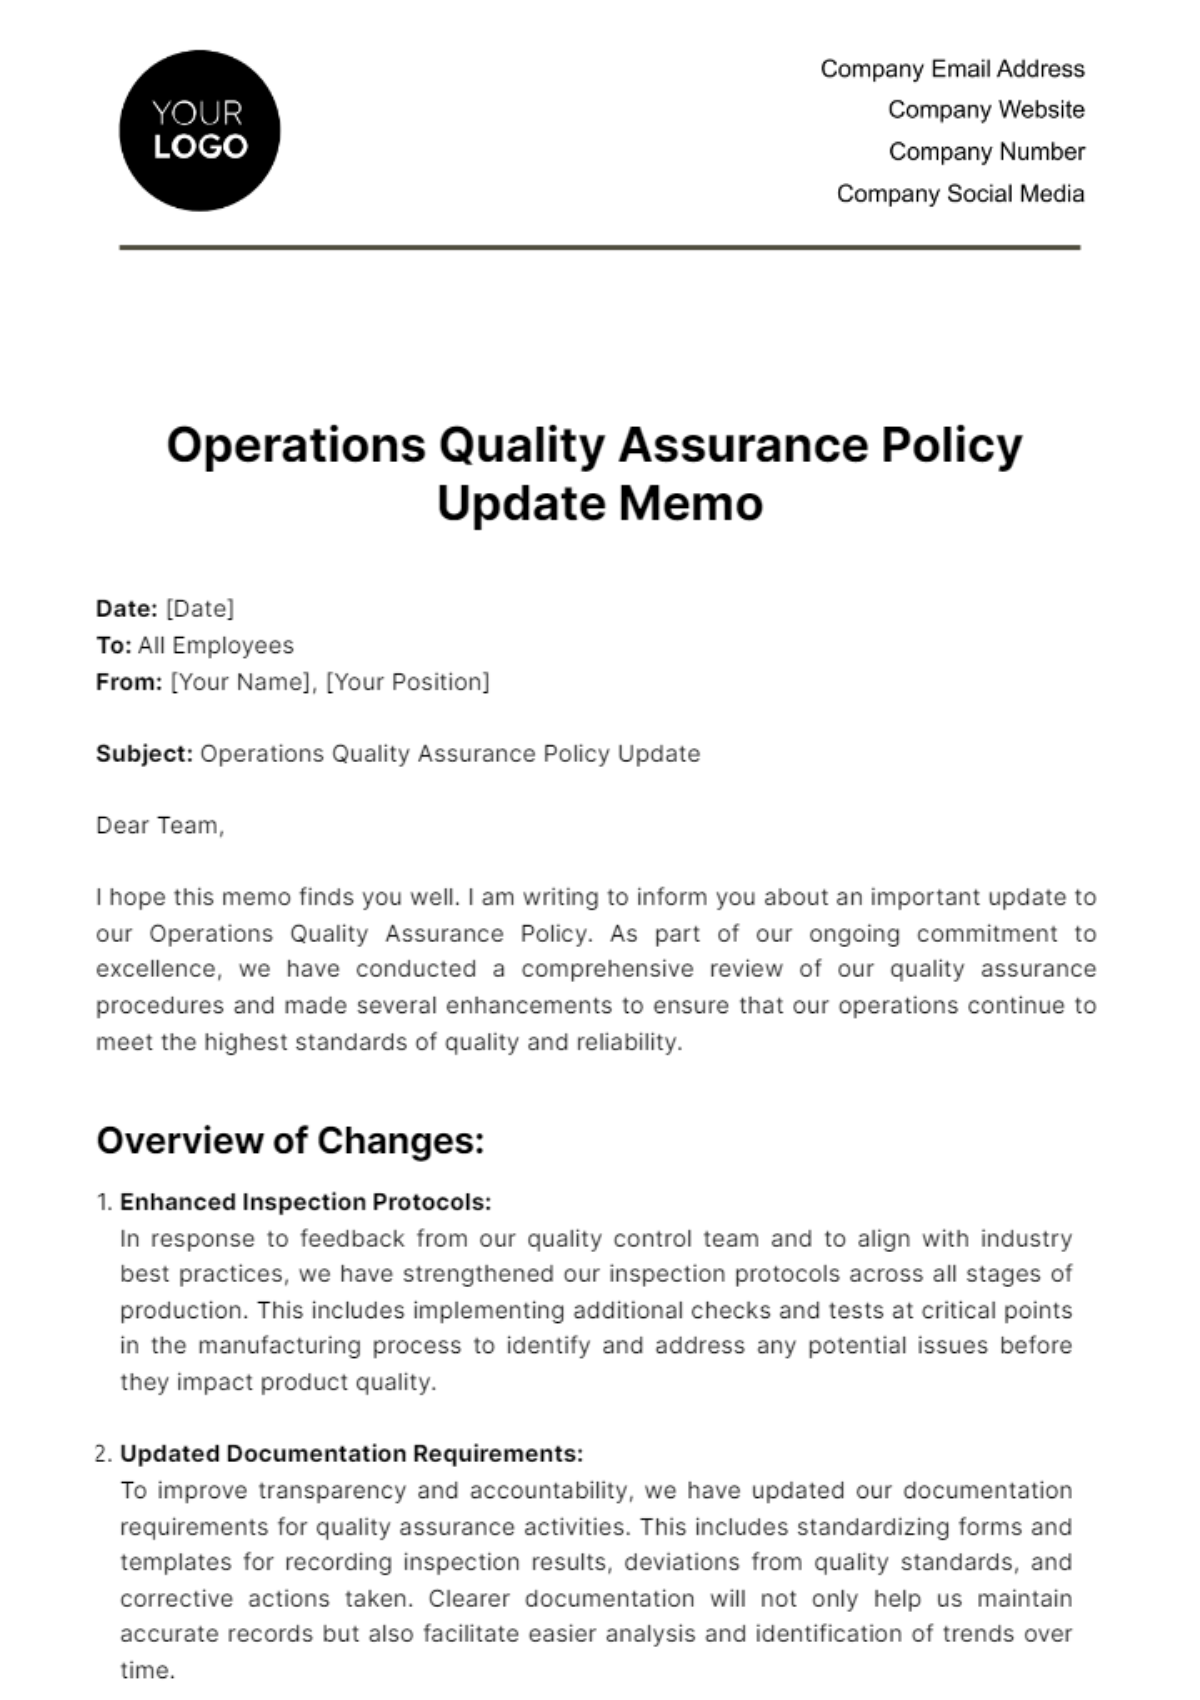 Free Operations Quality Assurance Policy Update Memo Template